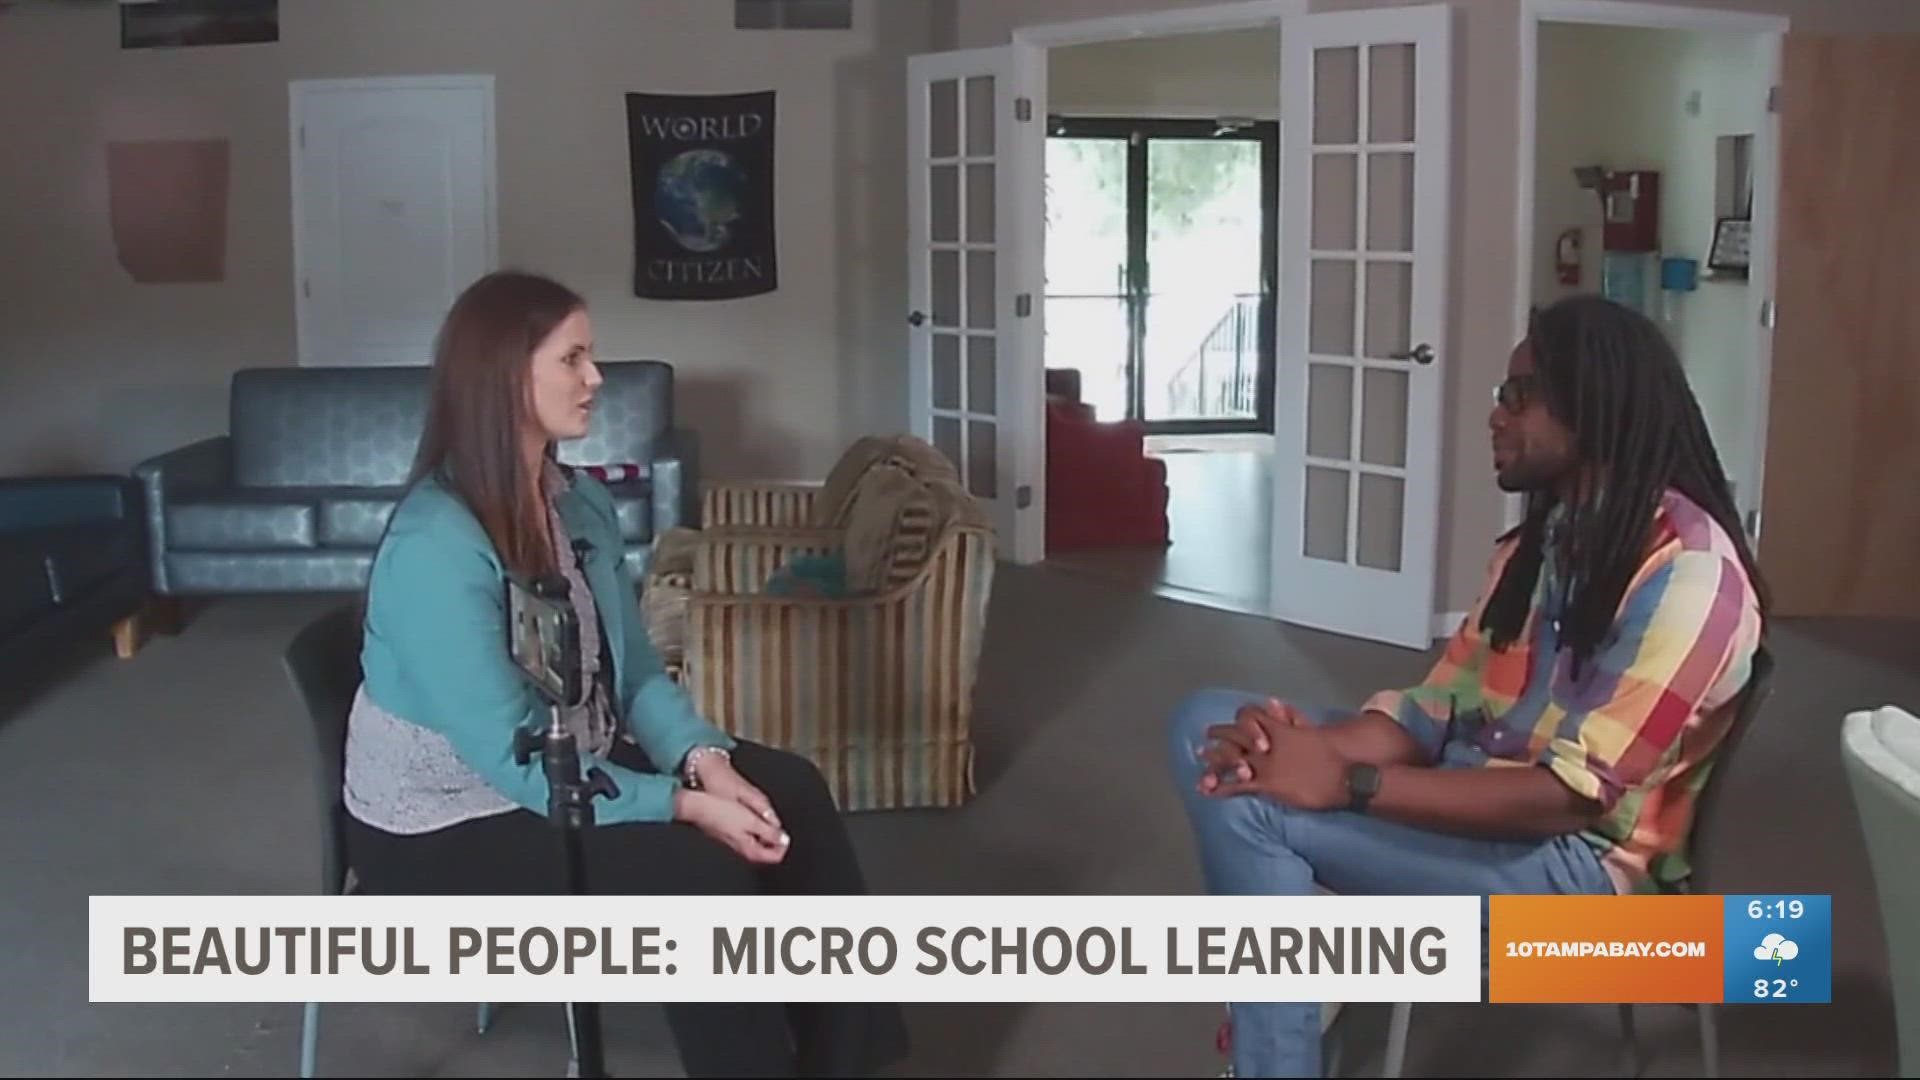 Jamie started a micro-school in her community with just one class. Now she has multiple micro-schools expanding across the Tampa Bay area.